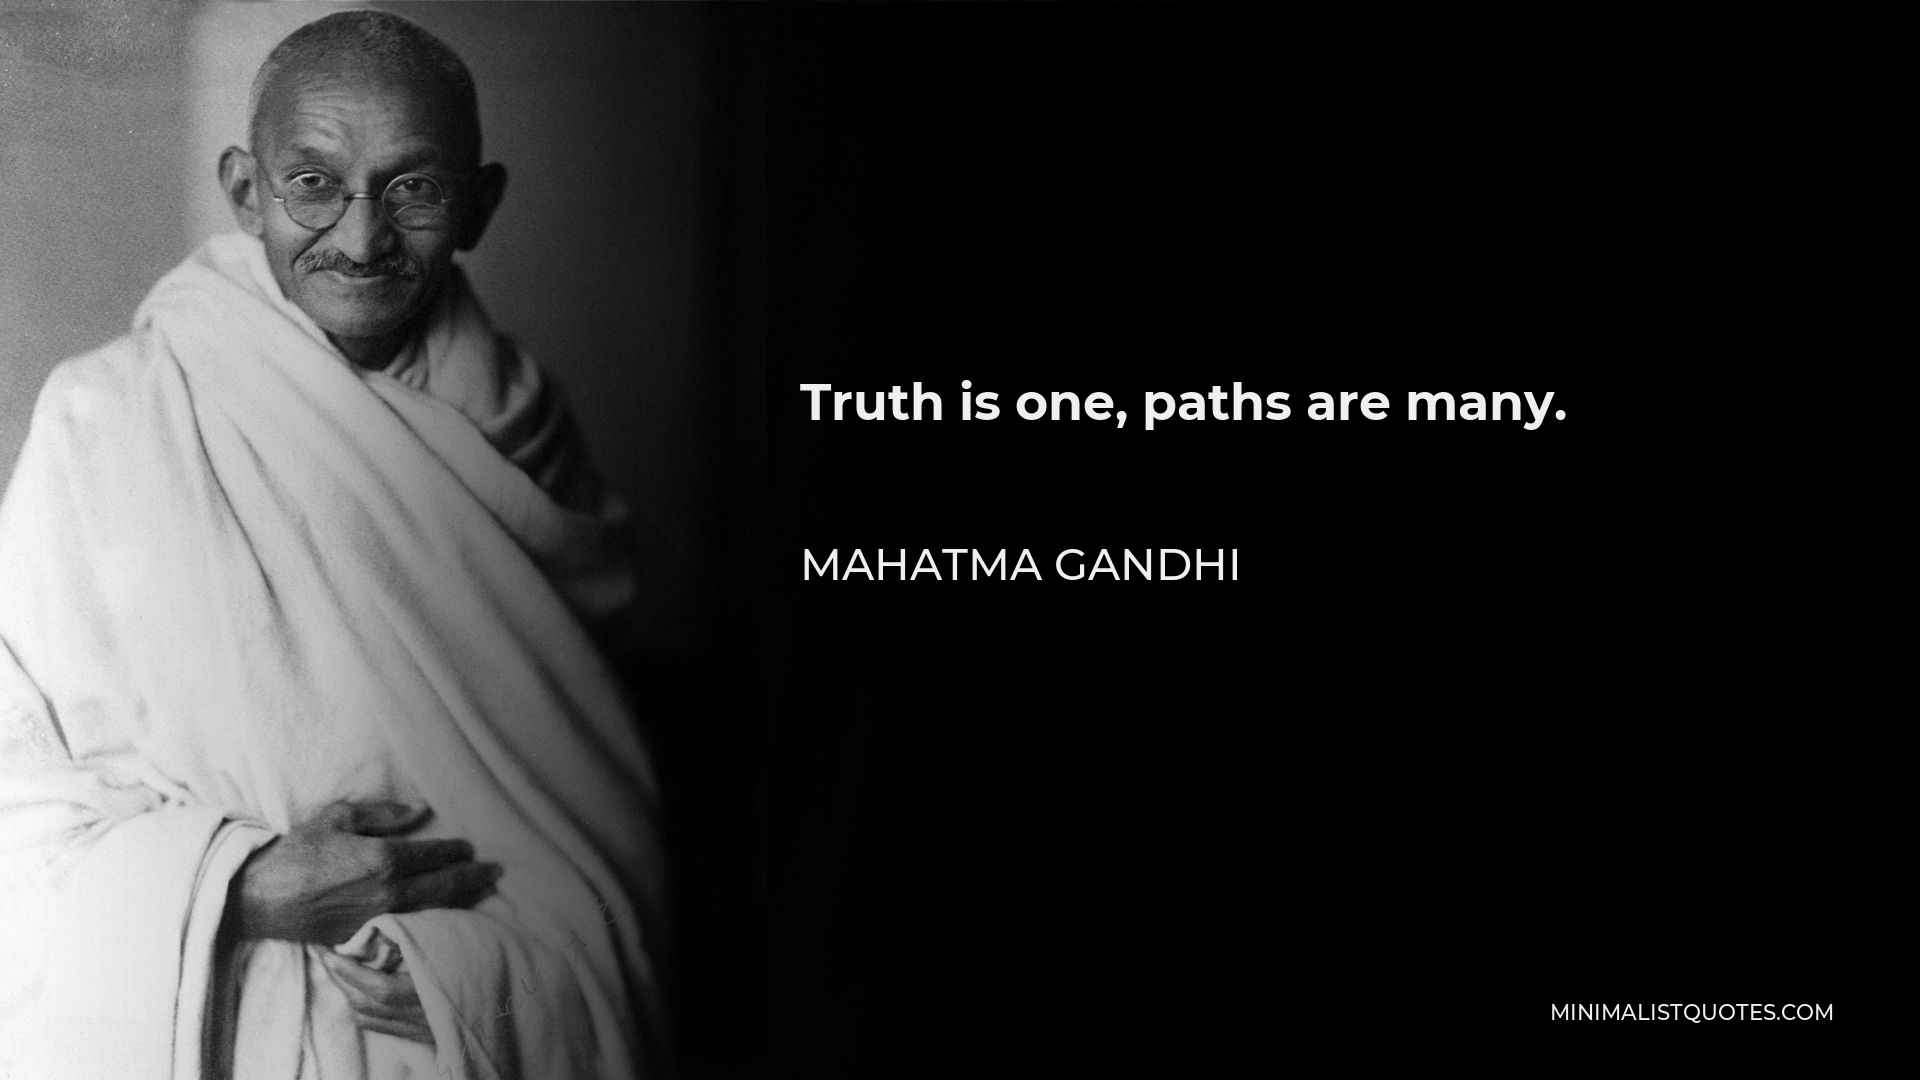 Mahatma Gandhi Quote: Truth is one, paths are many.